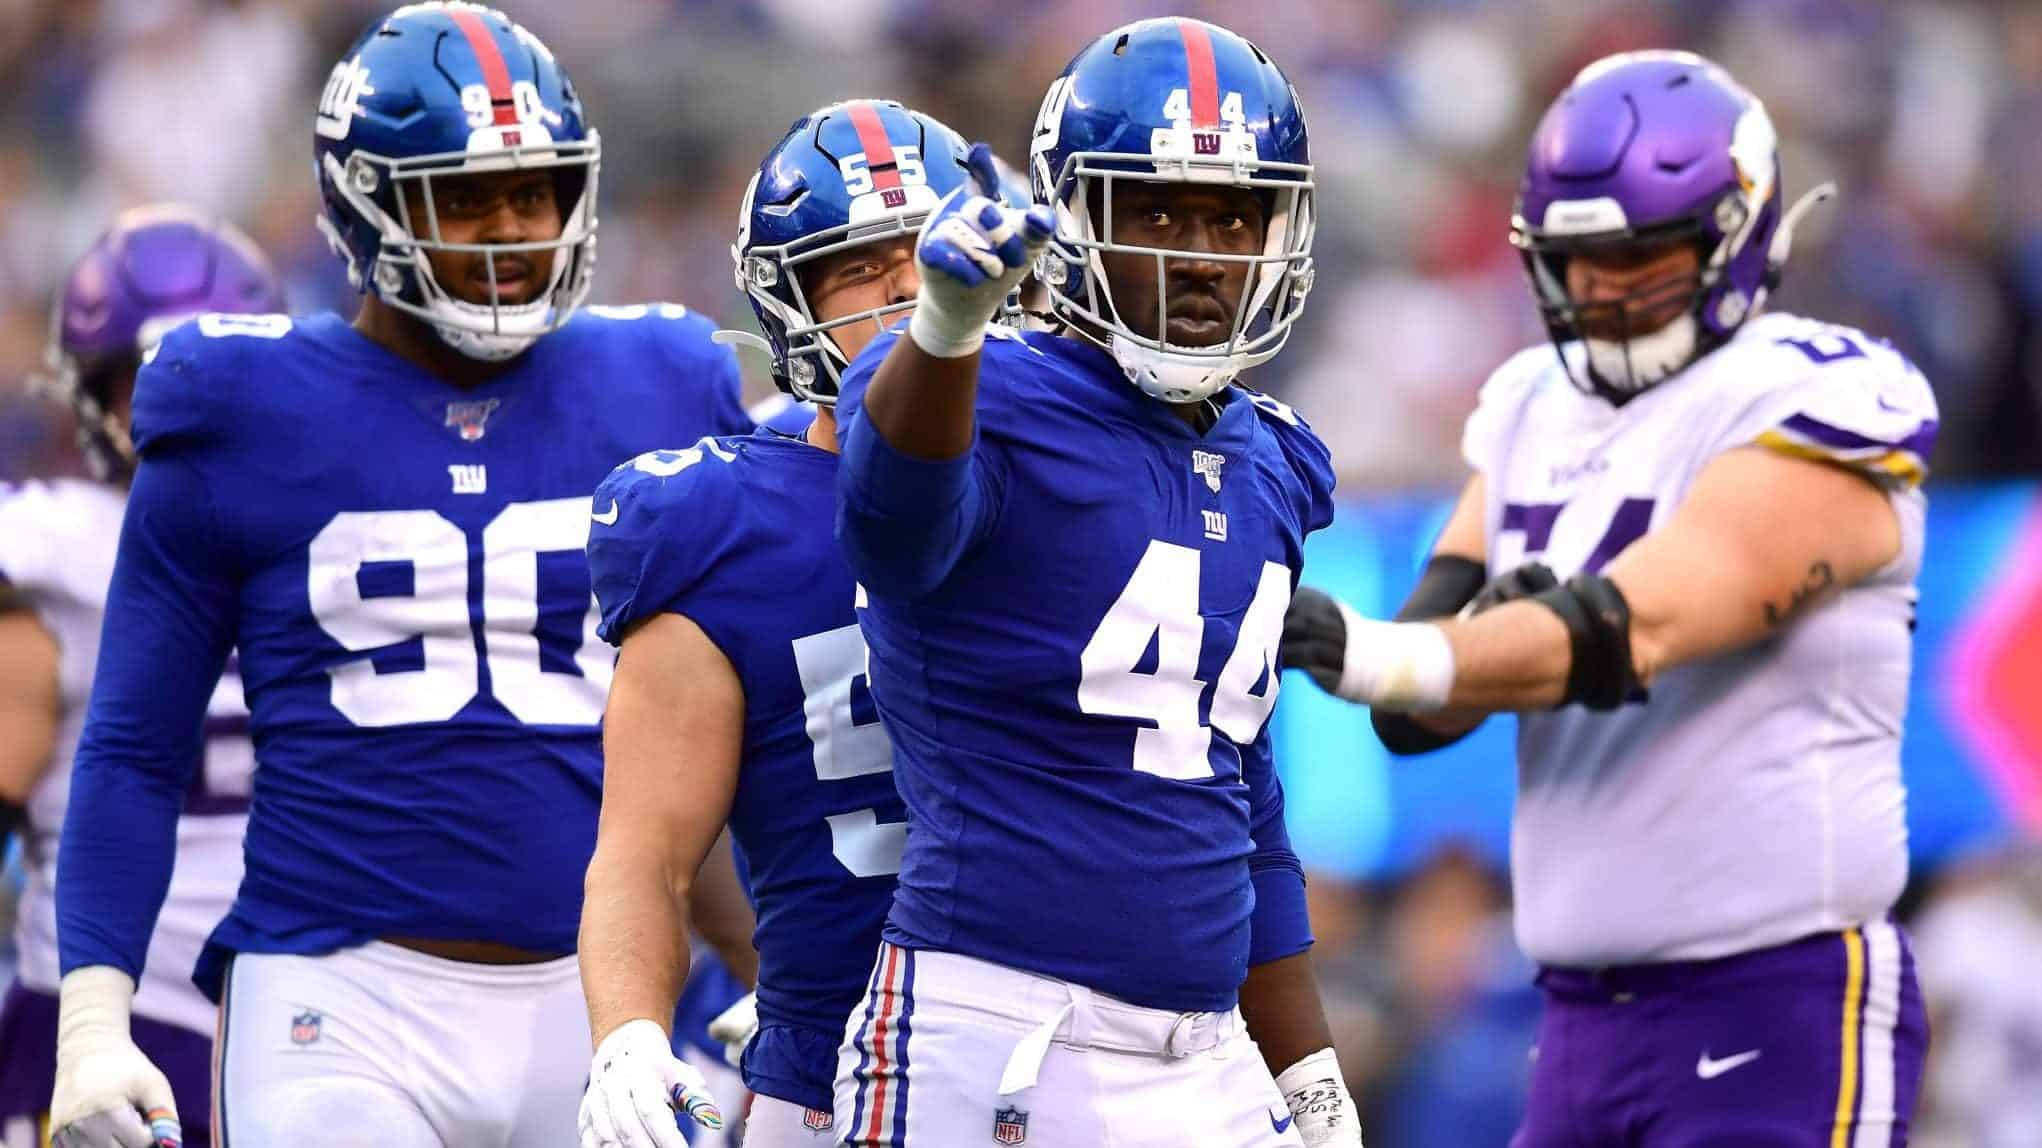 EAST RUTHERFORD, NEW JERSEY - OCTOBER 06: Markus Golden #44 of the New York Giants reacts in the third quarter during their game against the Minnesota Vikings at MetLife Stadium on October 06, 2019 in East Rutherford, New Jersey.